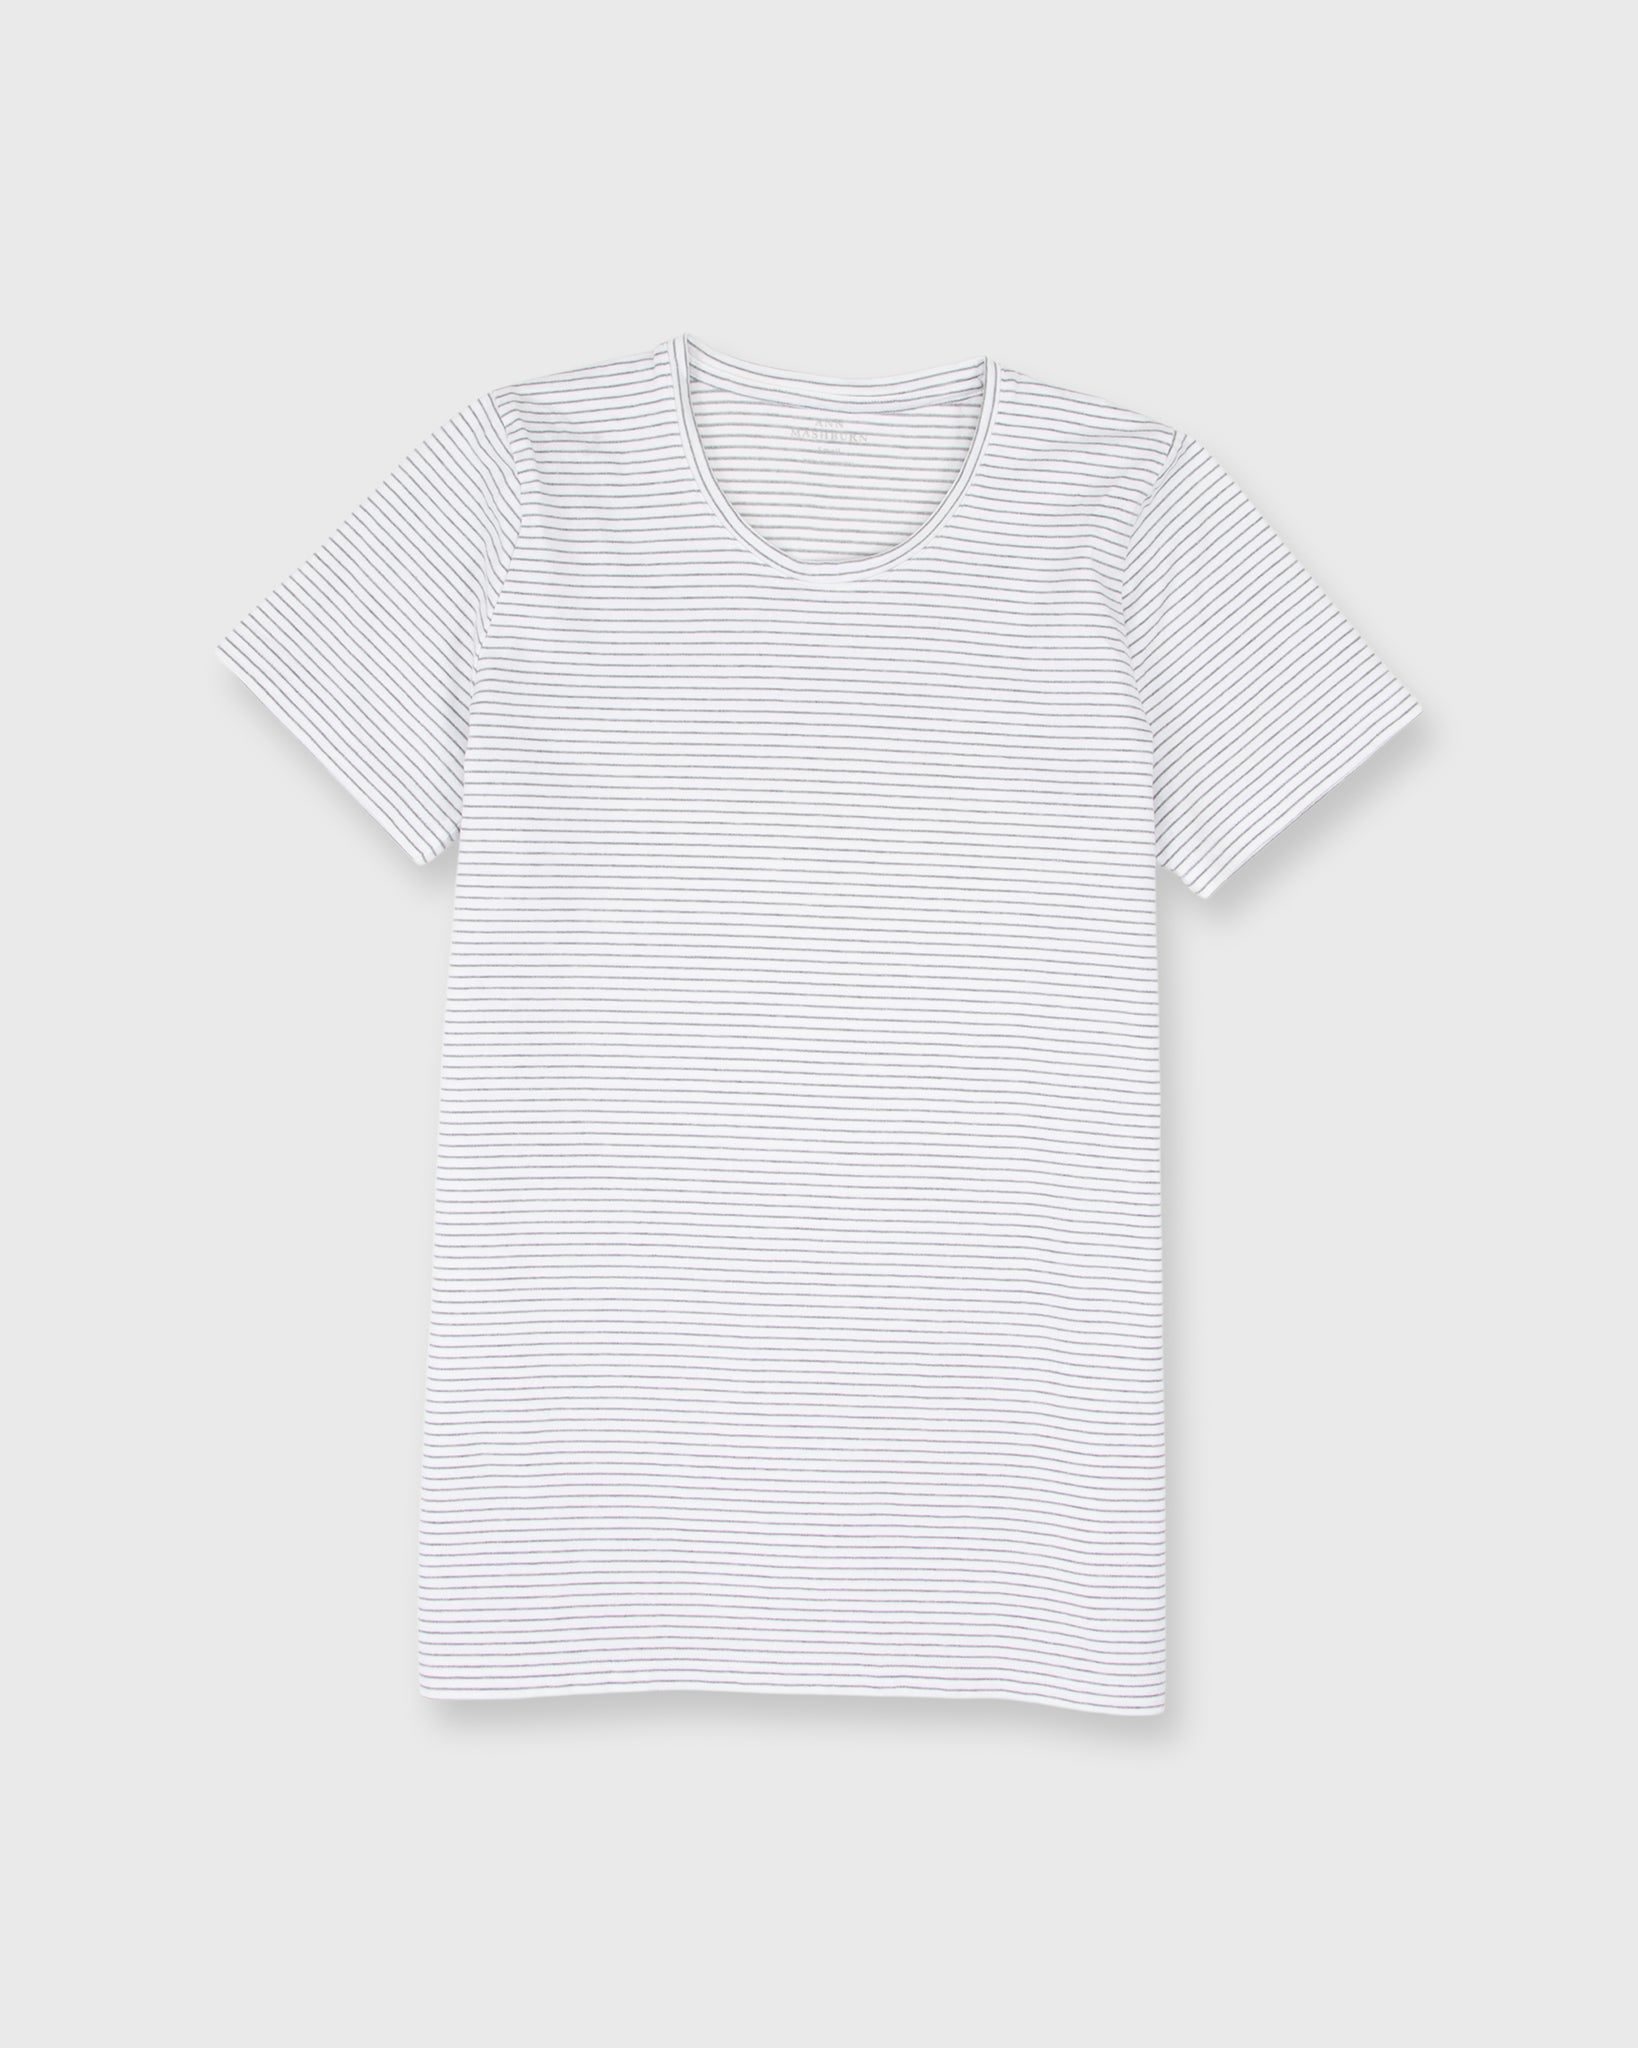 Short-Sleeved Relaxed Tee in White/Heather Grey Stripe Jersey